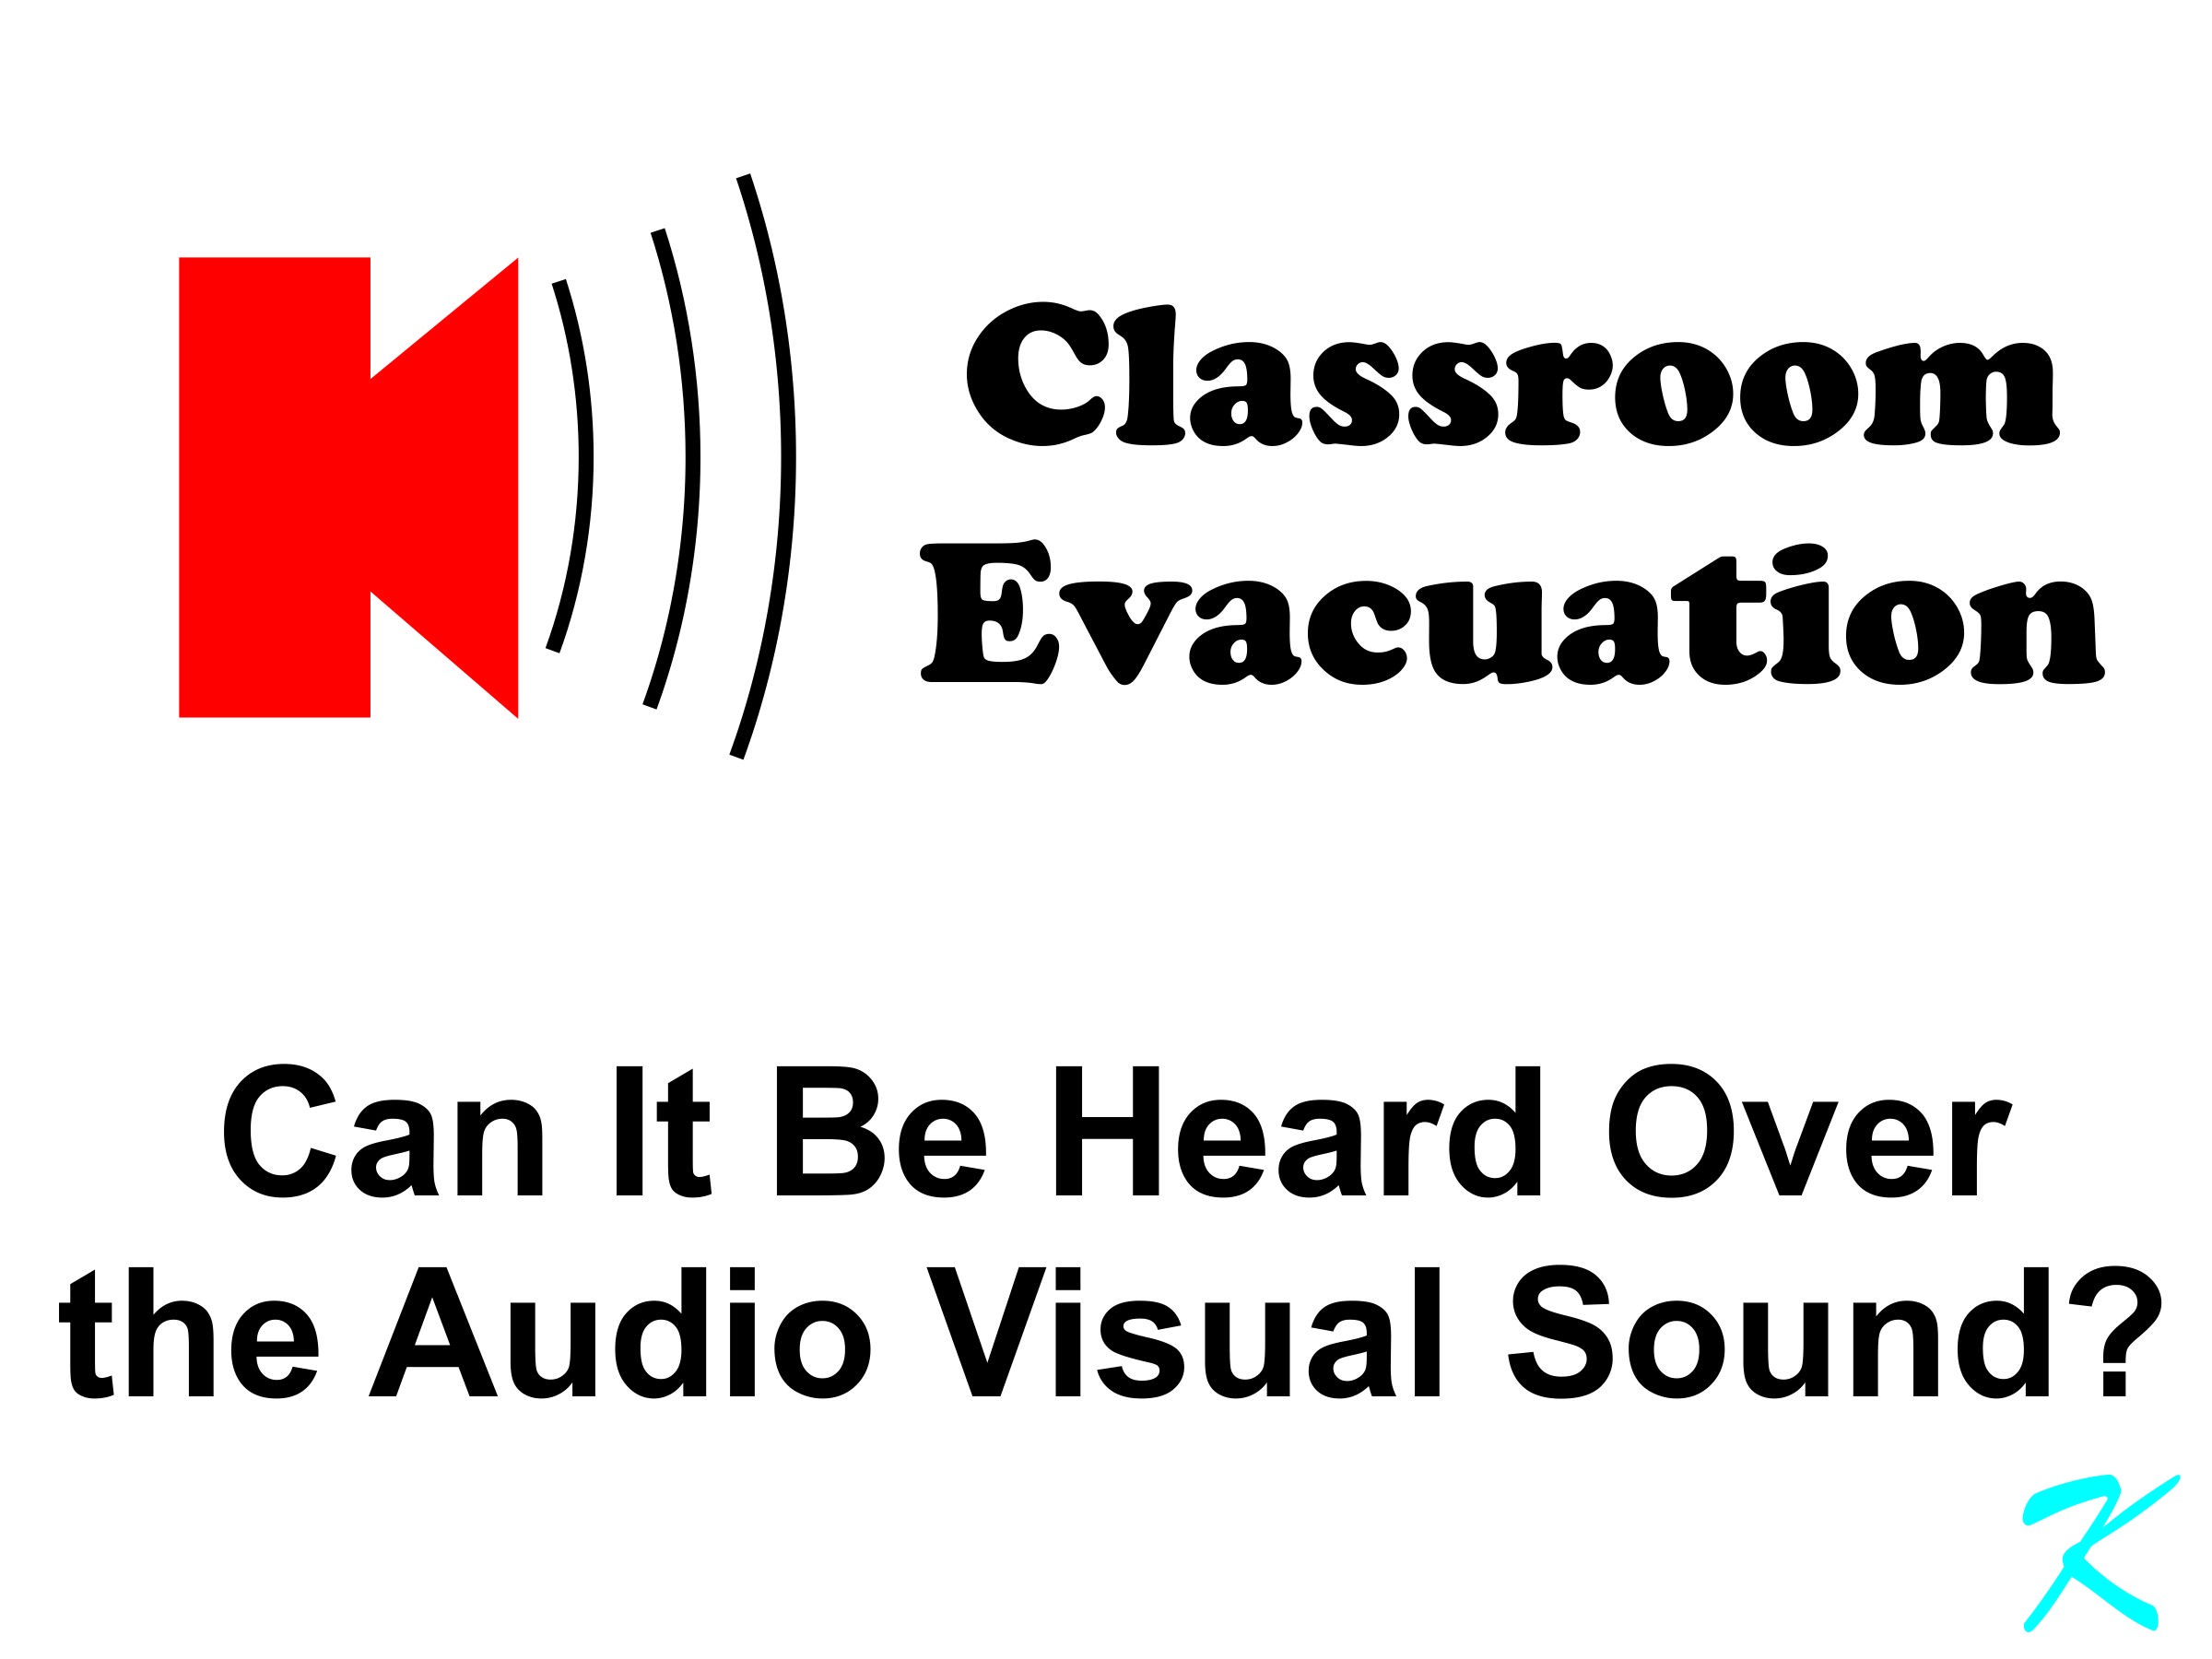 In a school, if the fire alarms are not as loud as the Audio / Visual system, the AV system should be shut down during a fire alarm. Whether or not the law says you have to, if the students can't hear the alarm, there's a problem.